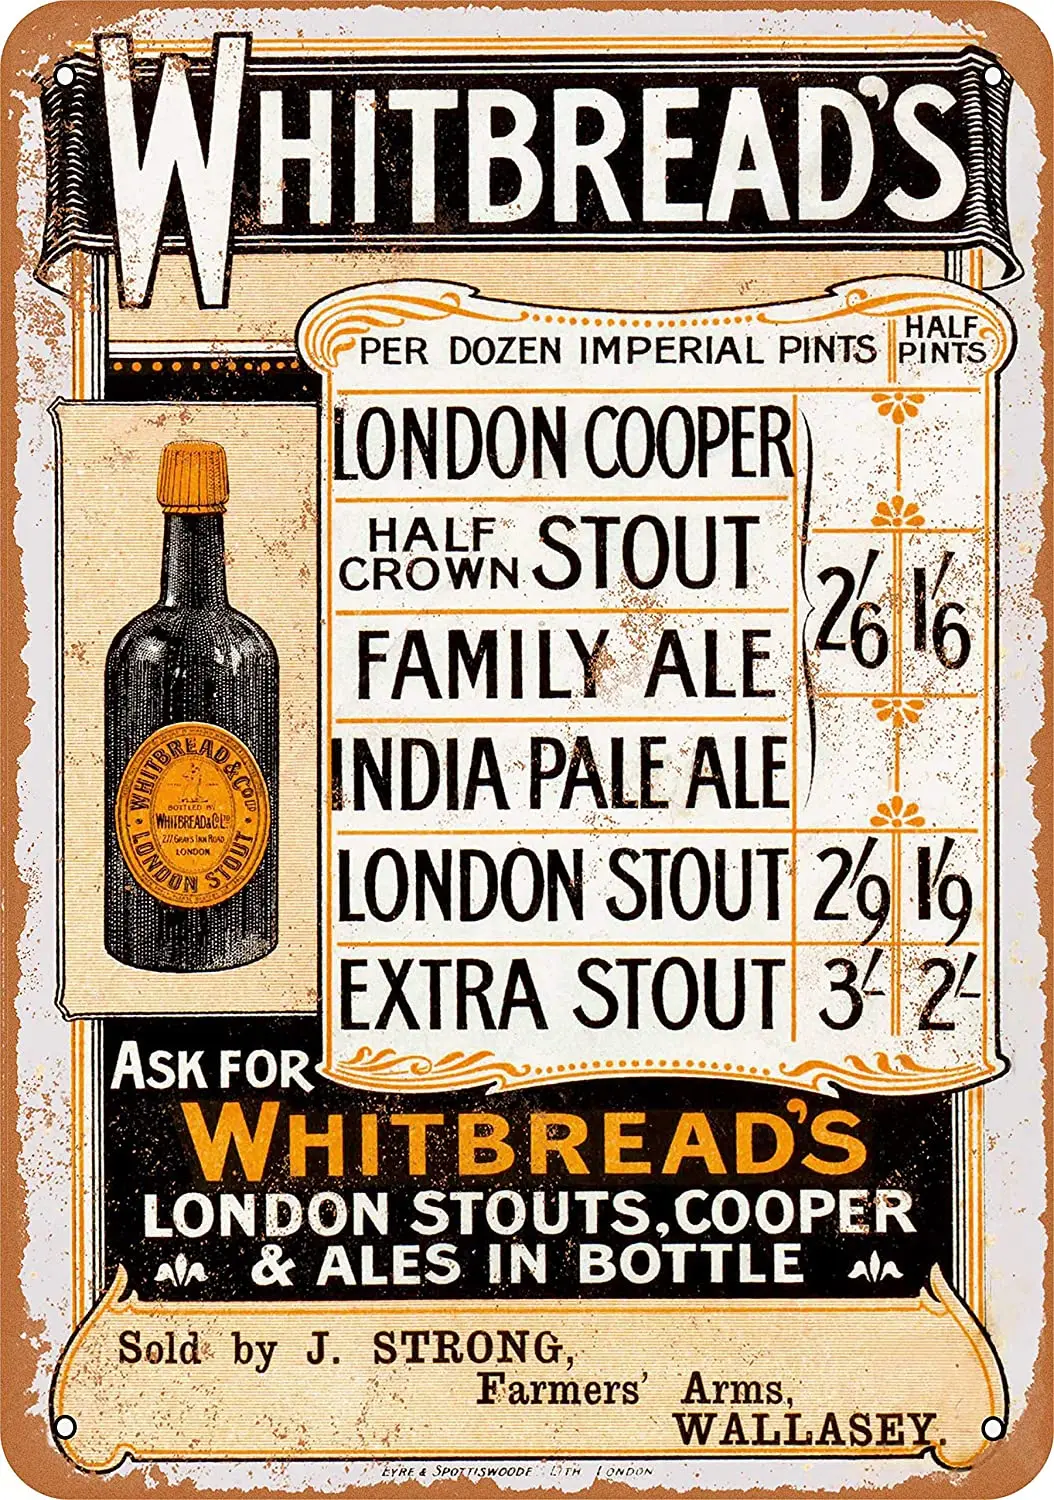 

WallColor 8*12 Metal Sign Whitbread's London Stouts and Ales Vintage Look